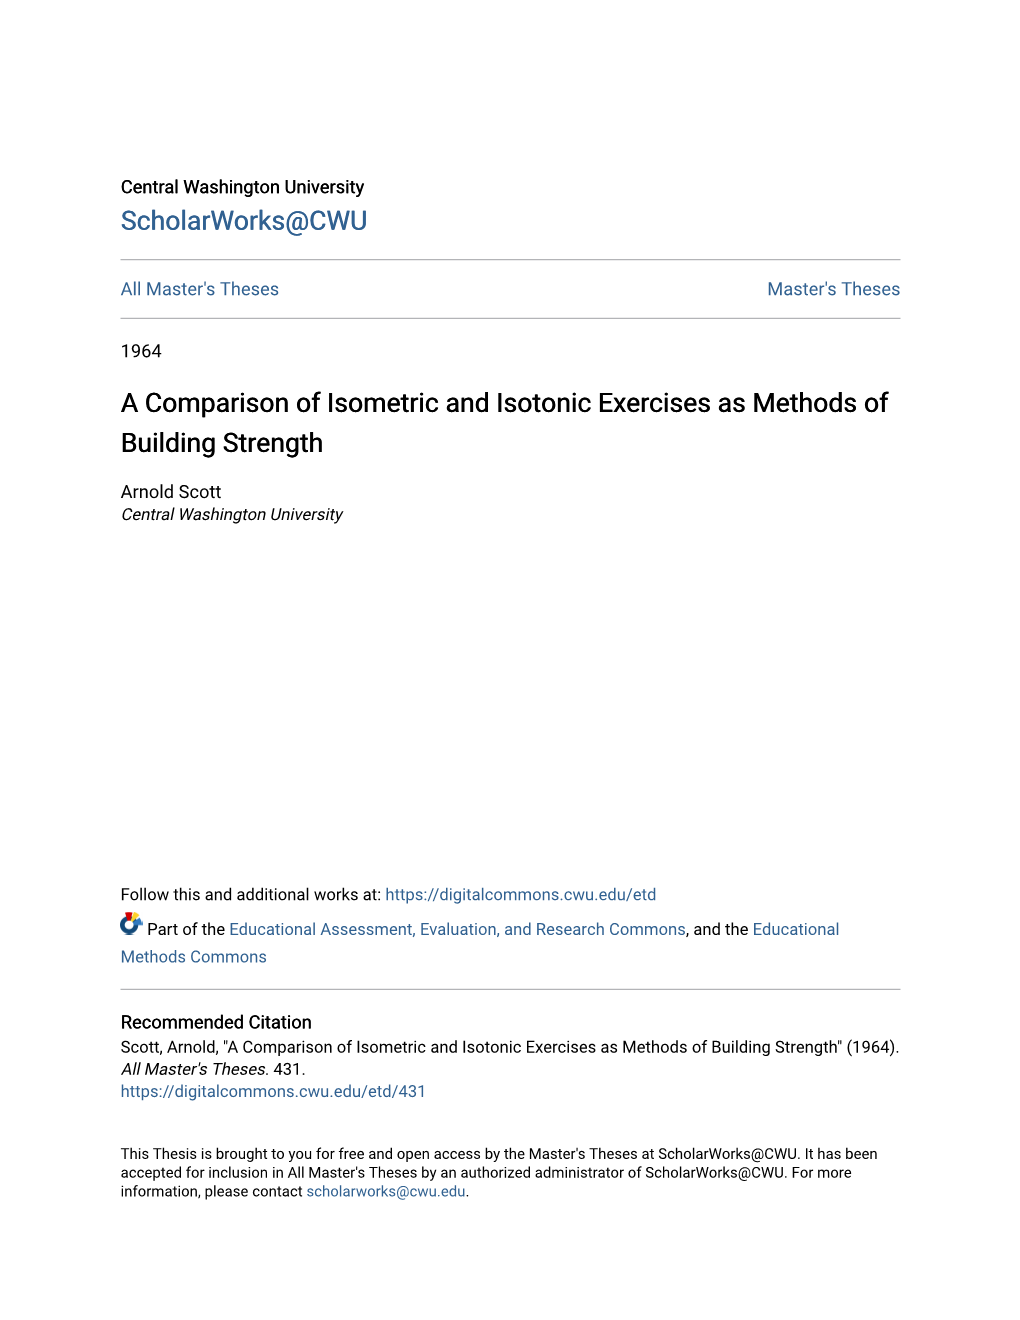 A Comparison of Isometric and Isotonic Exercises As Methods of Building Strength